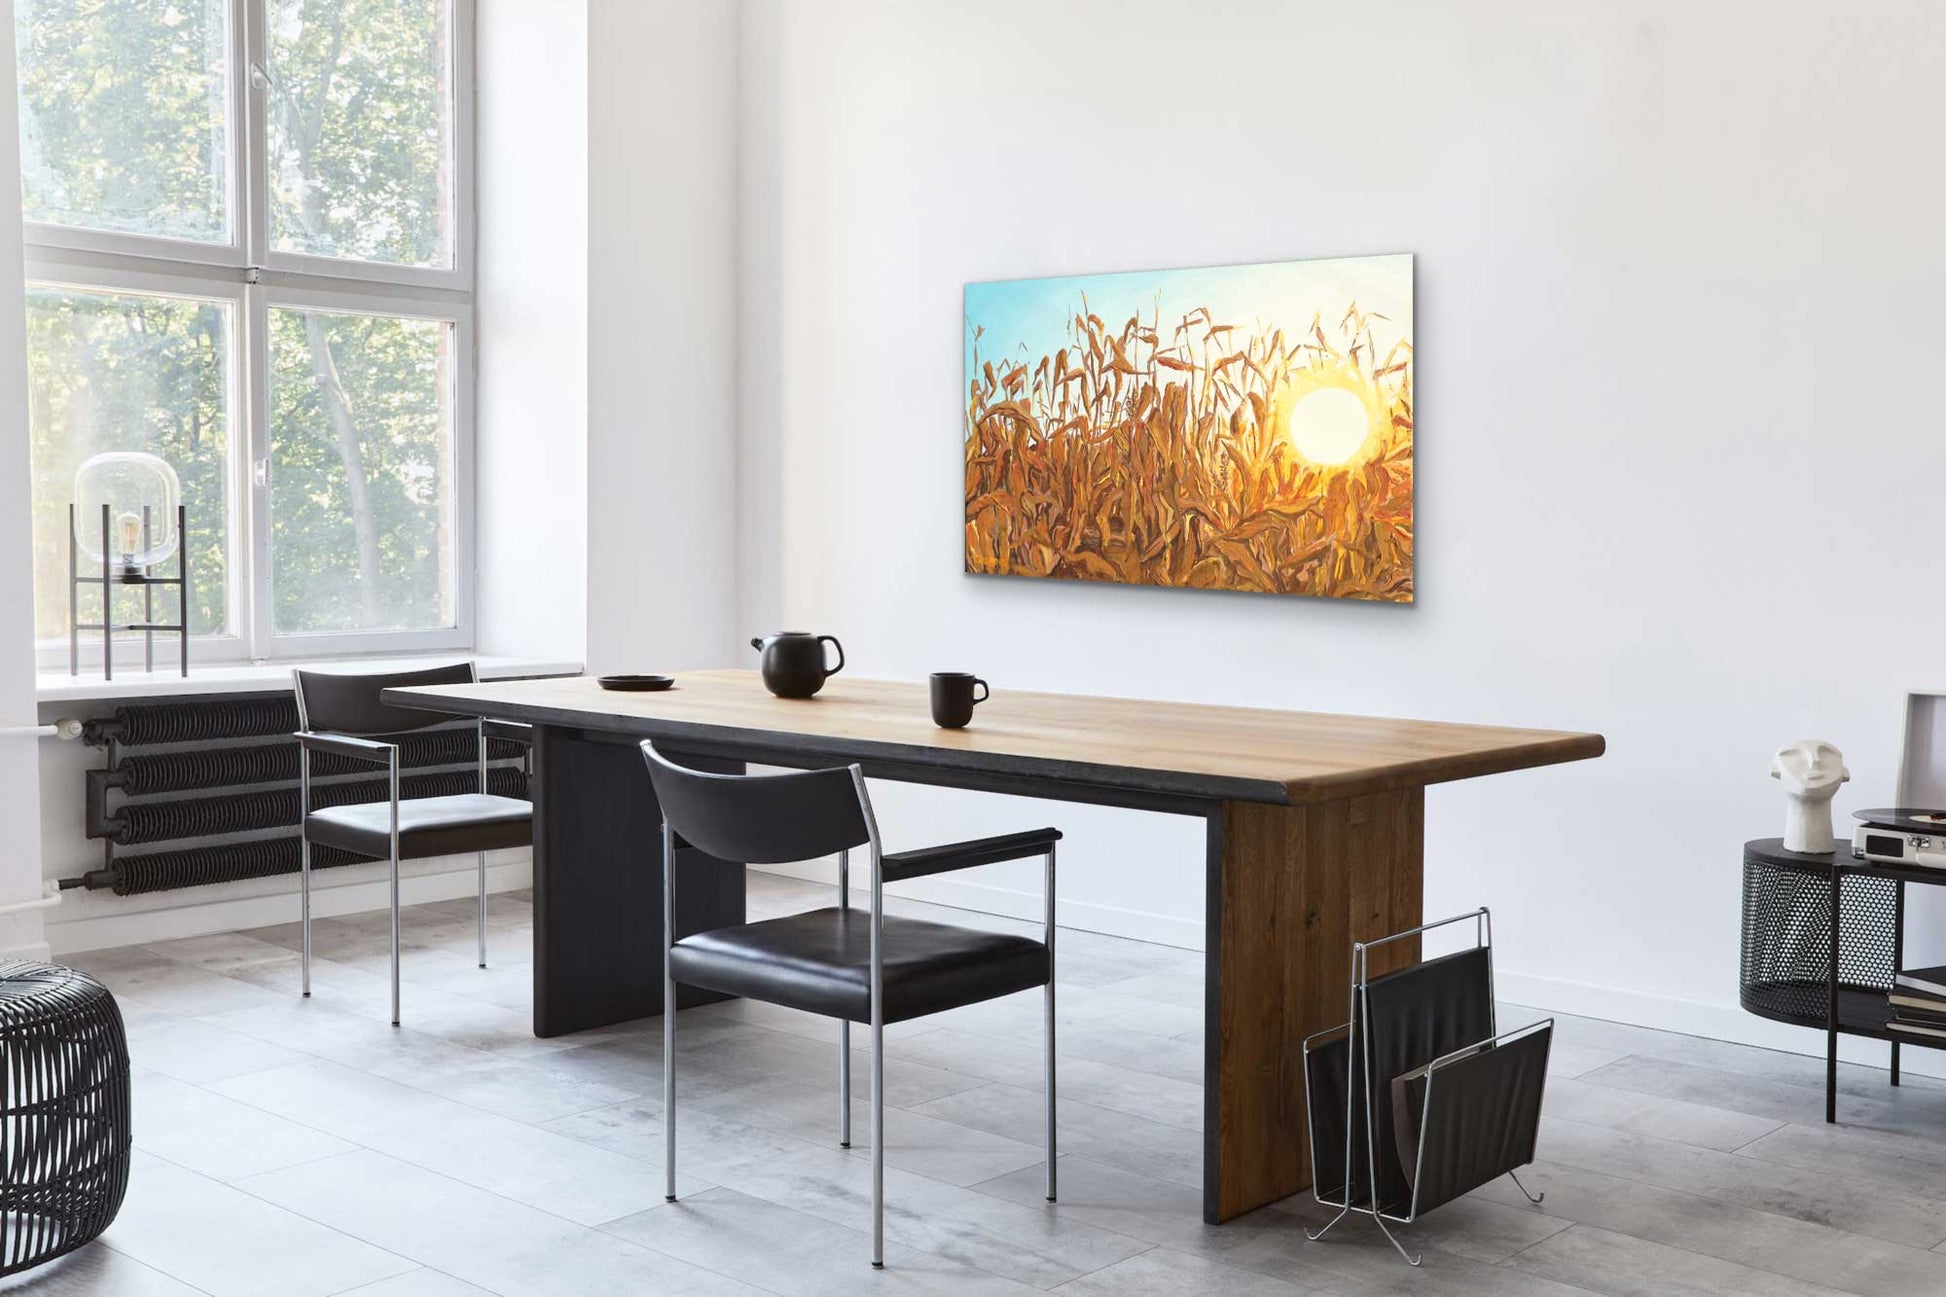 Dry autumn corn stalk field illuminated by the sunlight. high quality giclee print on canvas by a professional canadian urban landscape artist. visual art ready to hang on your wall.